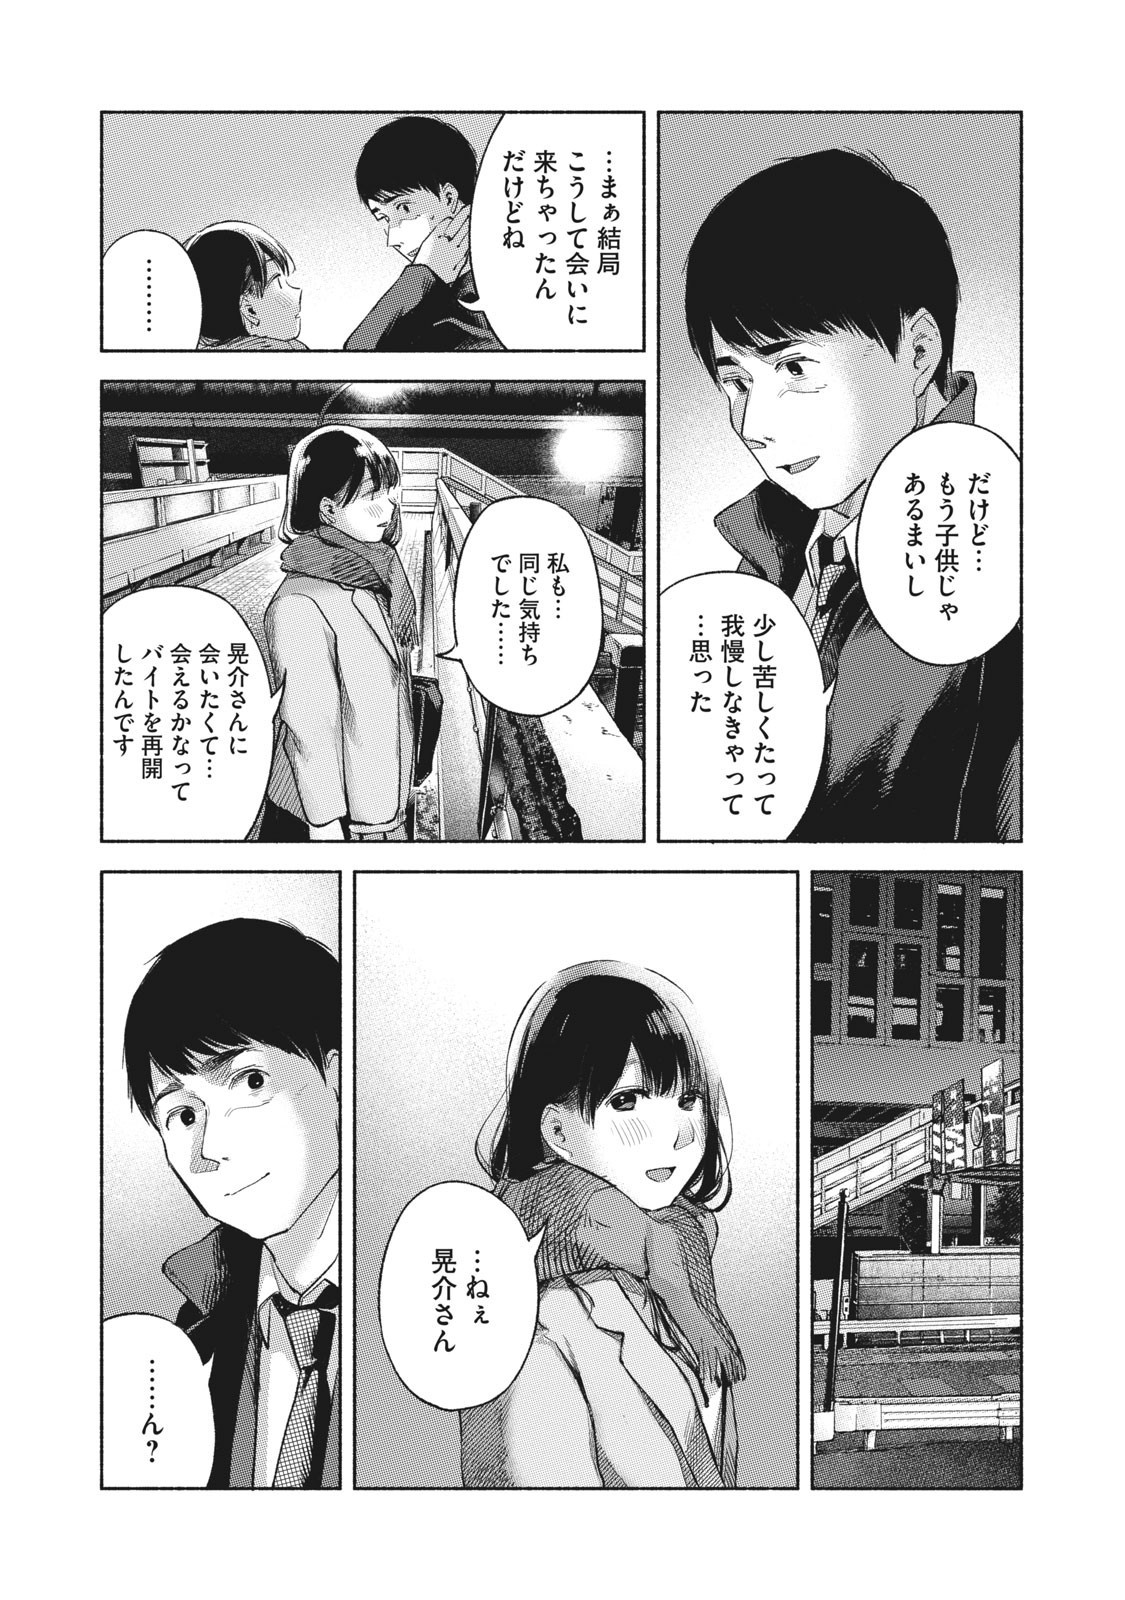 Musume no Tomodachi - Chapter 61.5 - Page 16